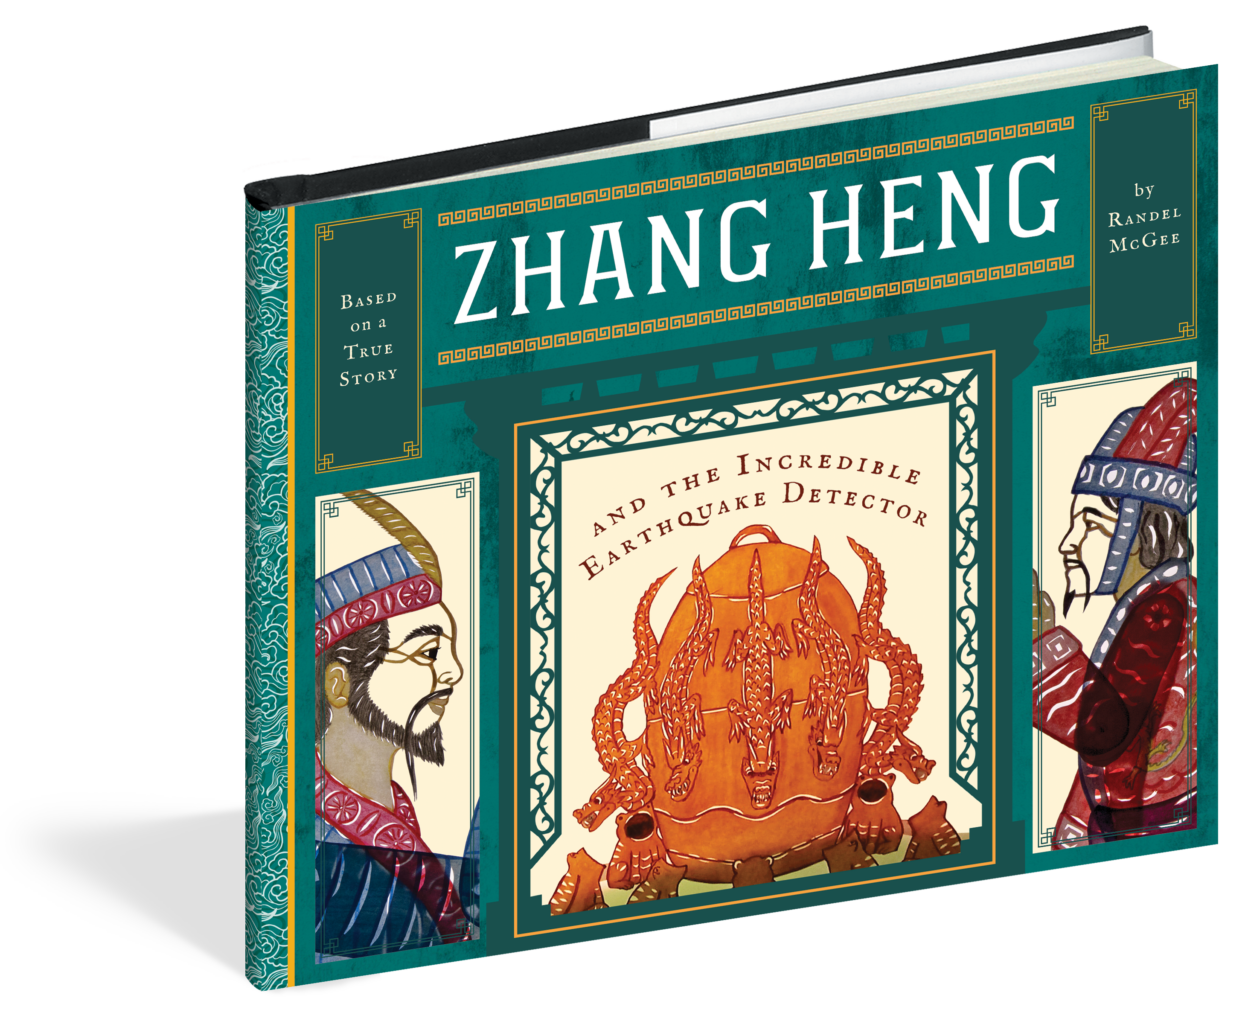 The cover of the picture book Zhang Heng and the Incredible Earthquake Detector.